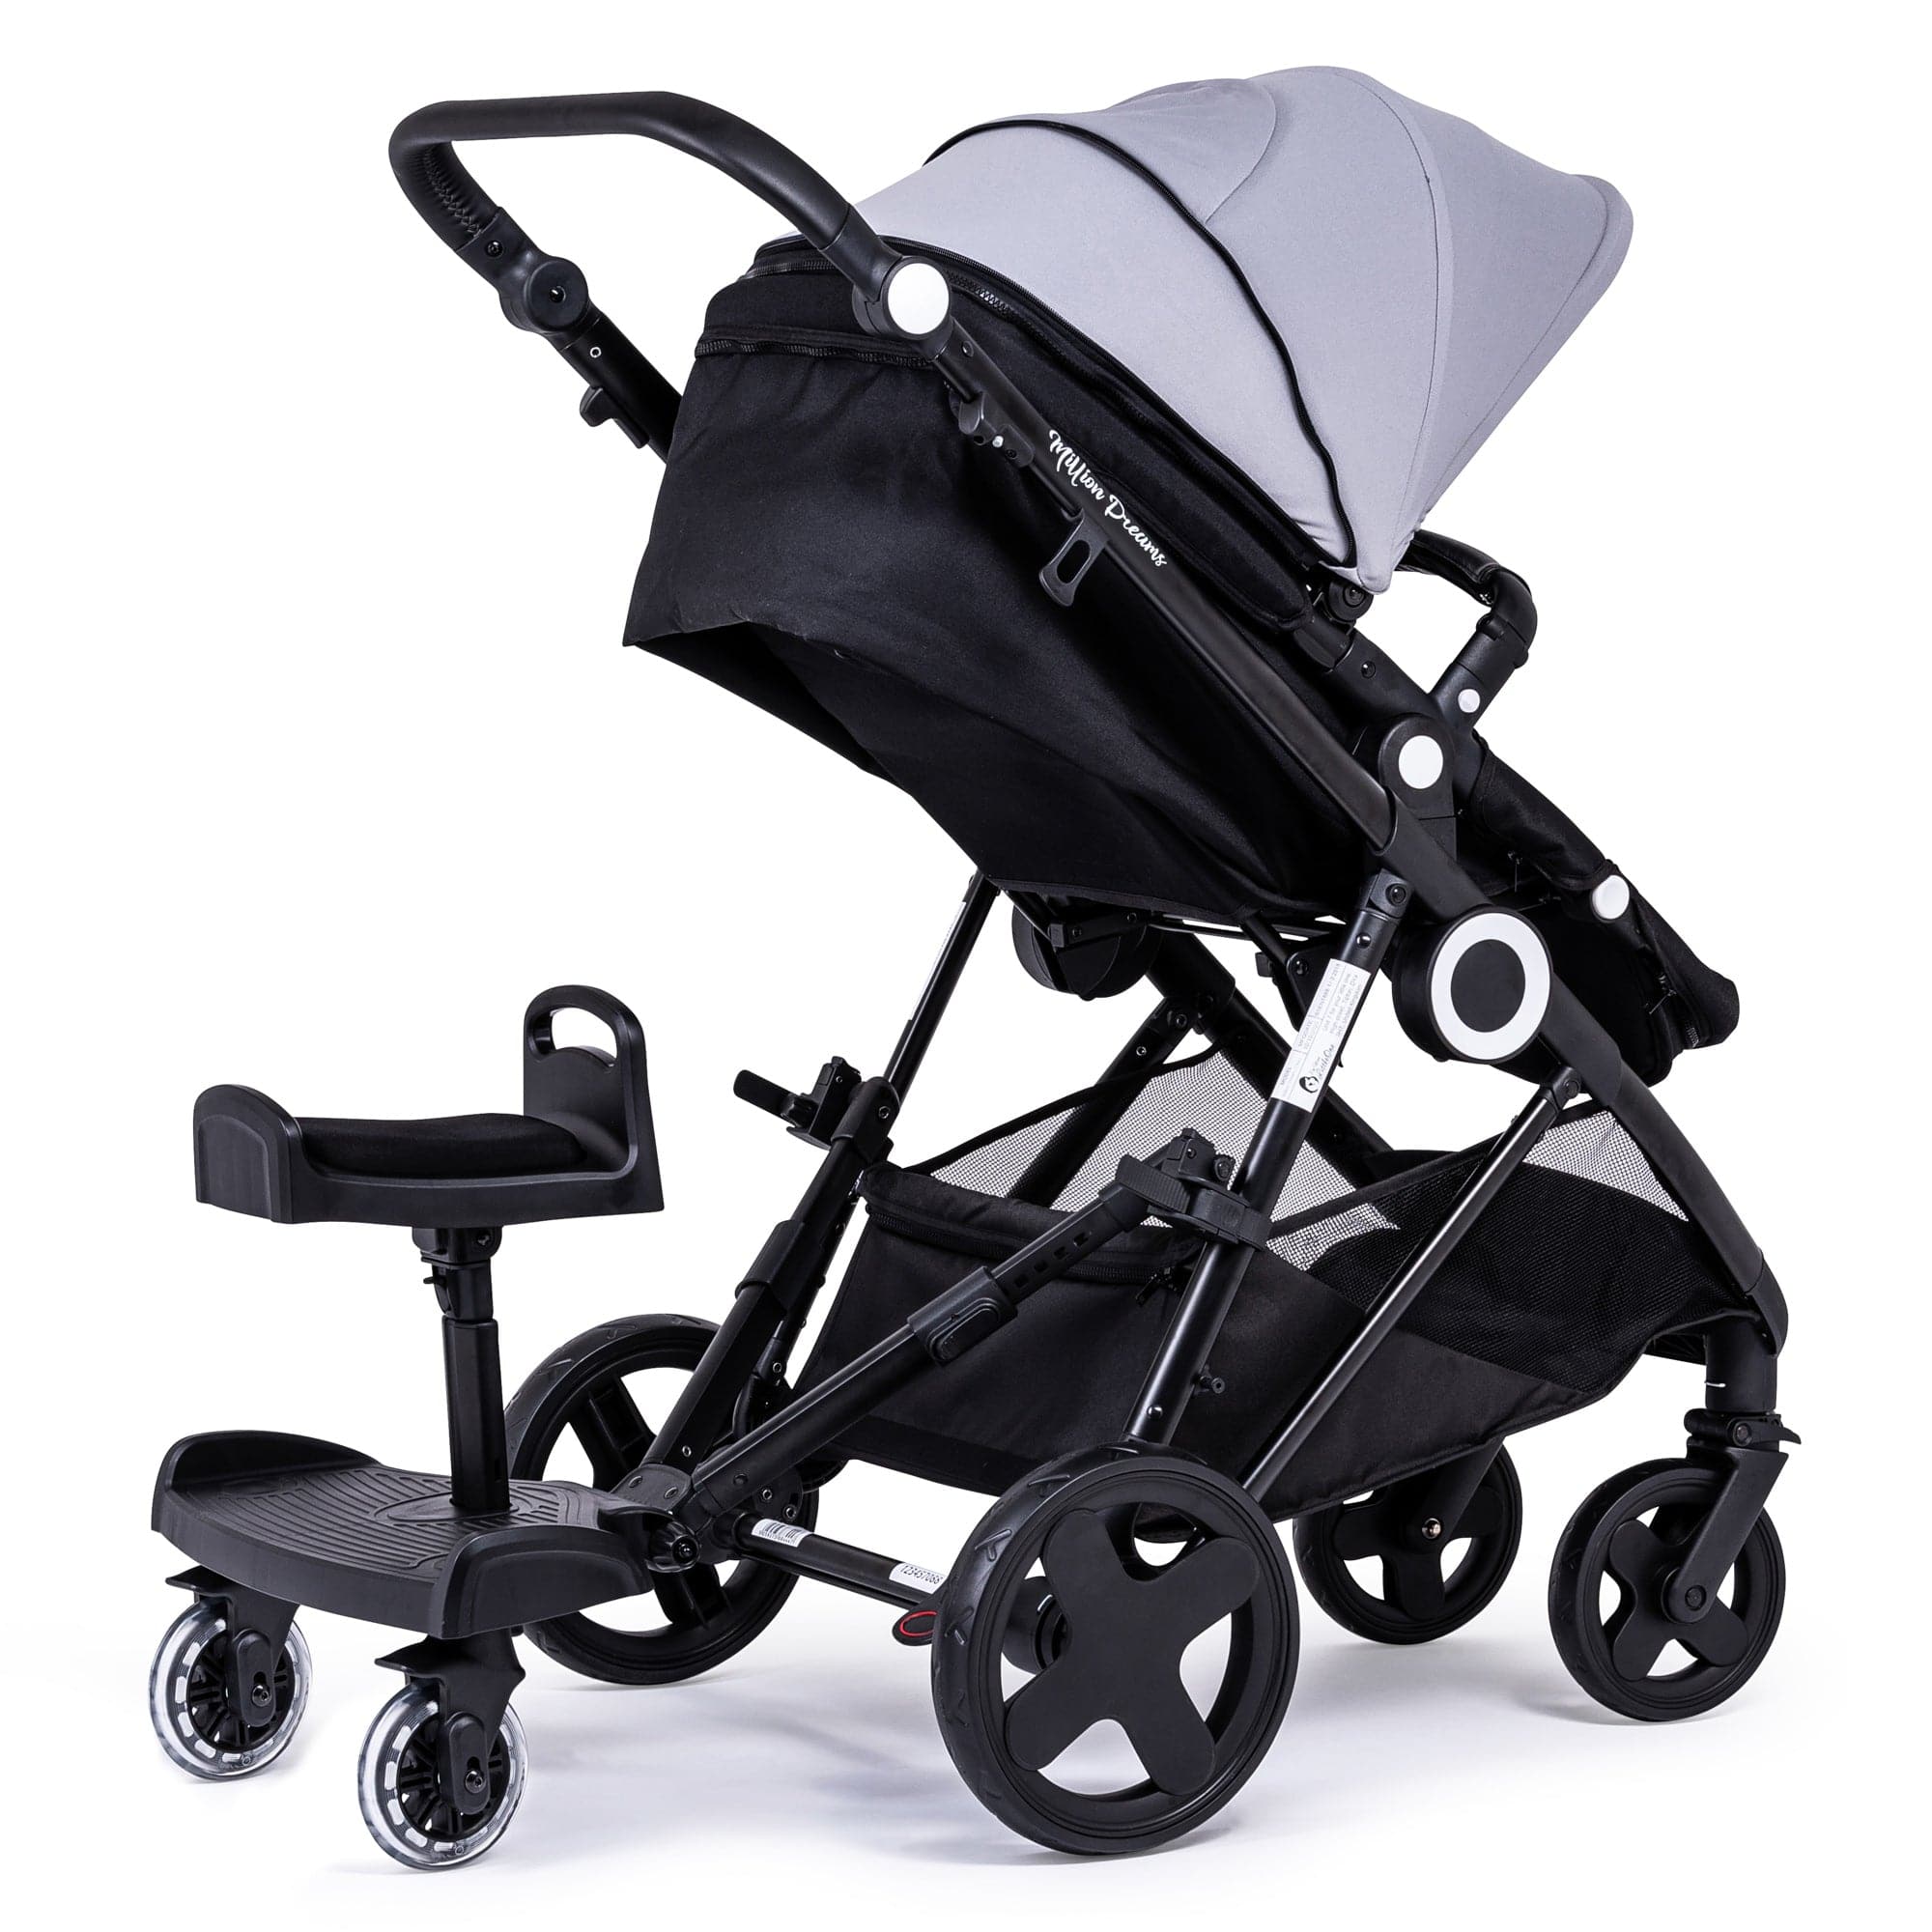 Universal Ride On Board with Seat - Compatible With Buggies / Pushchairs / Twins / Travel Systems - For Your Little One